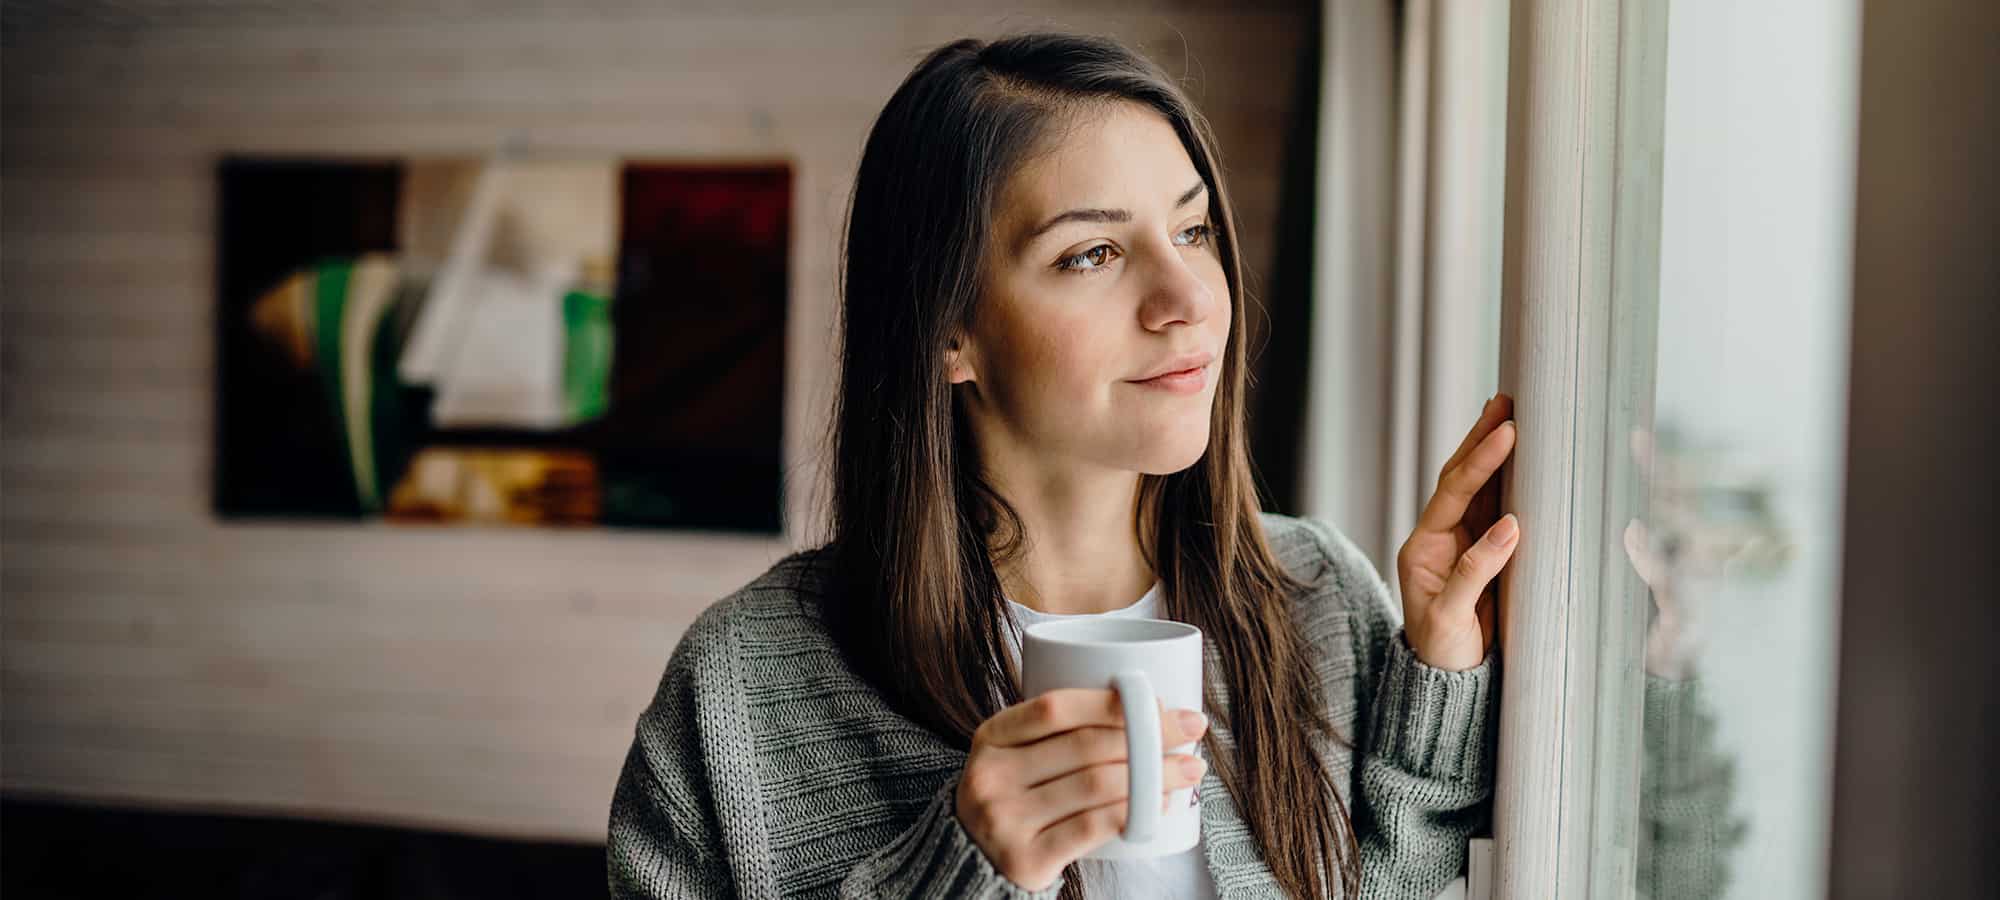 Woman looks longing out of window while holding cup